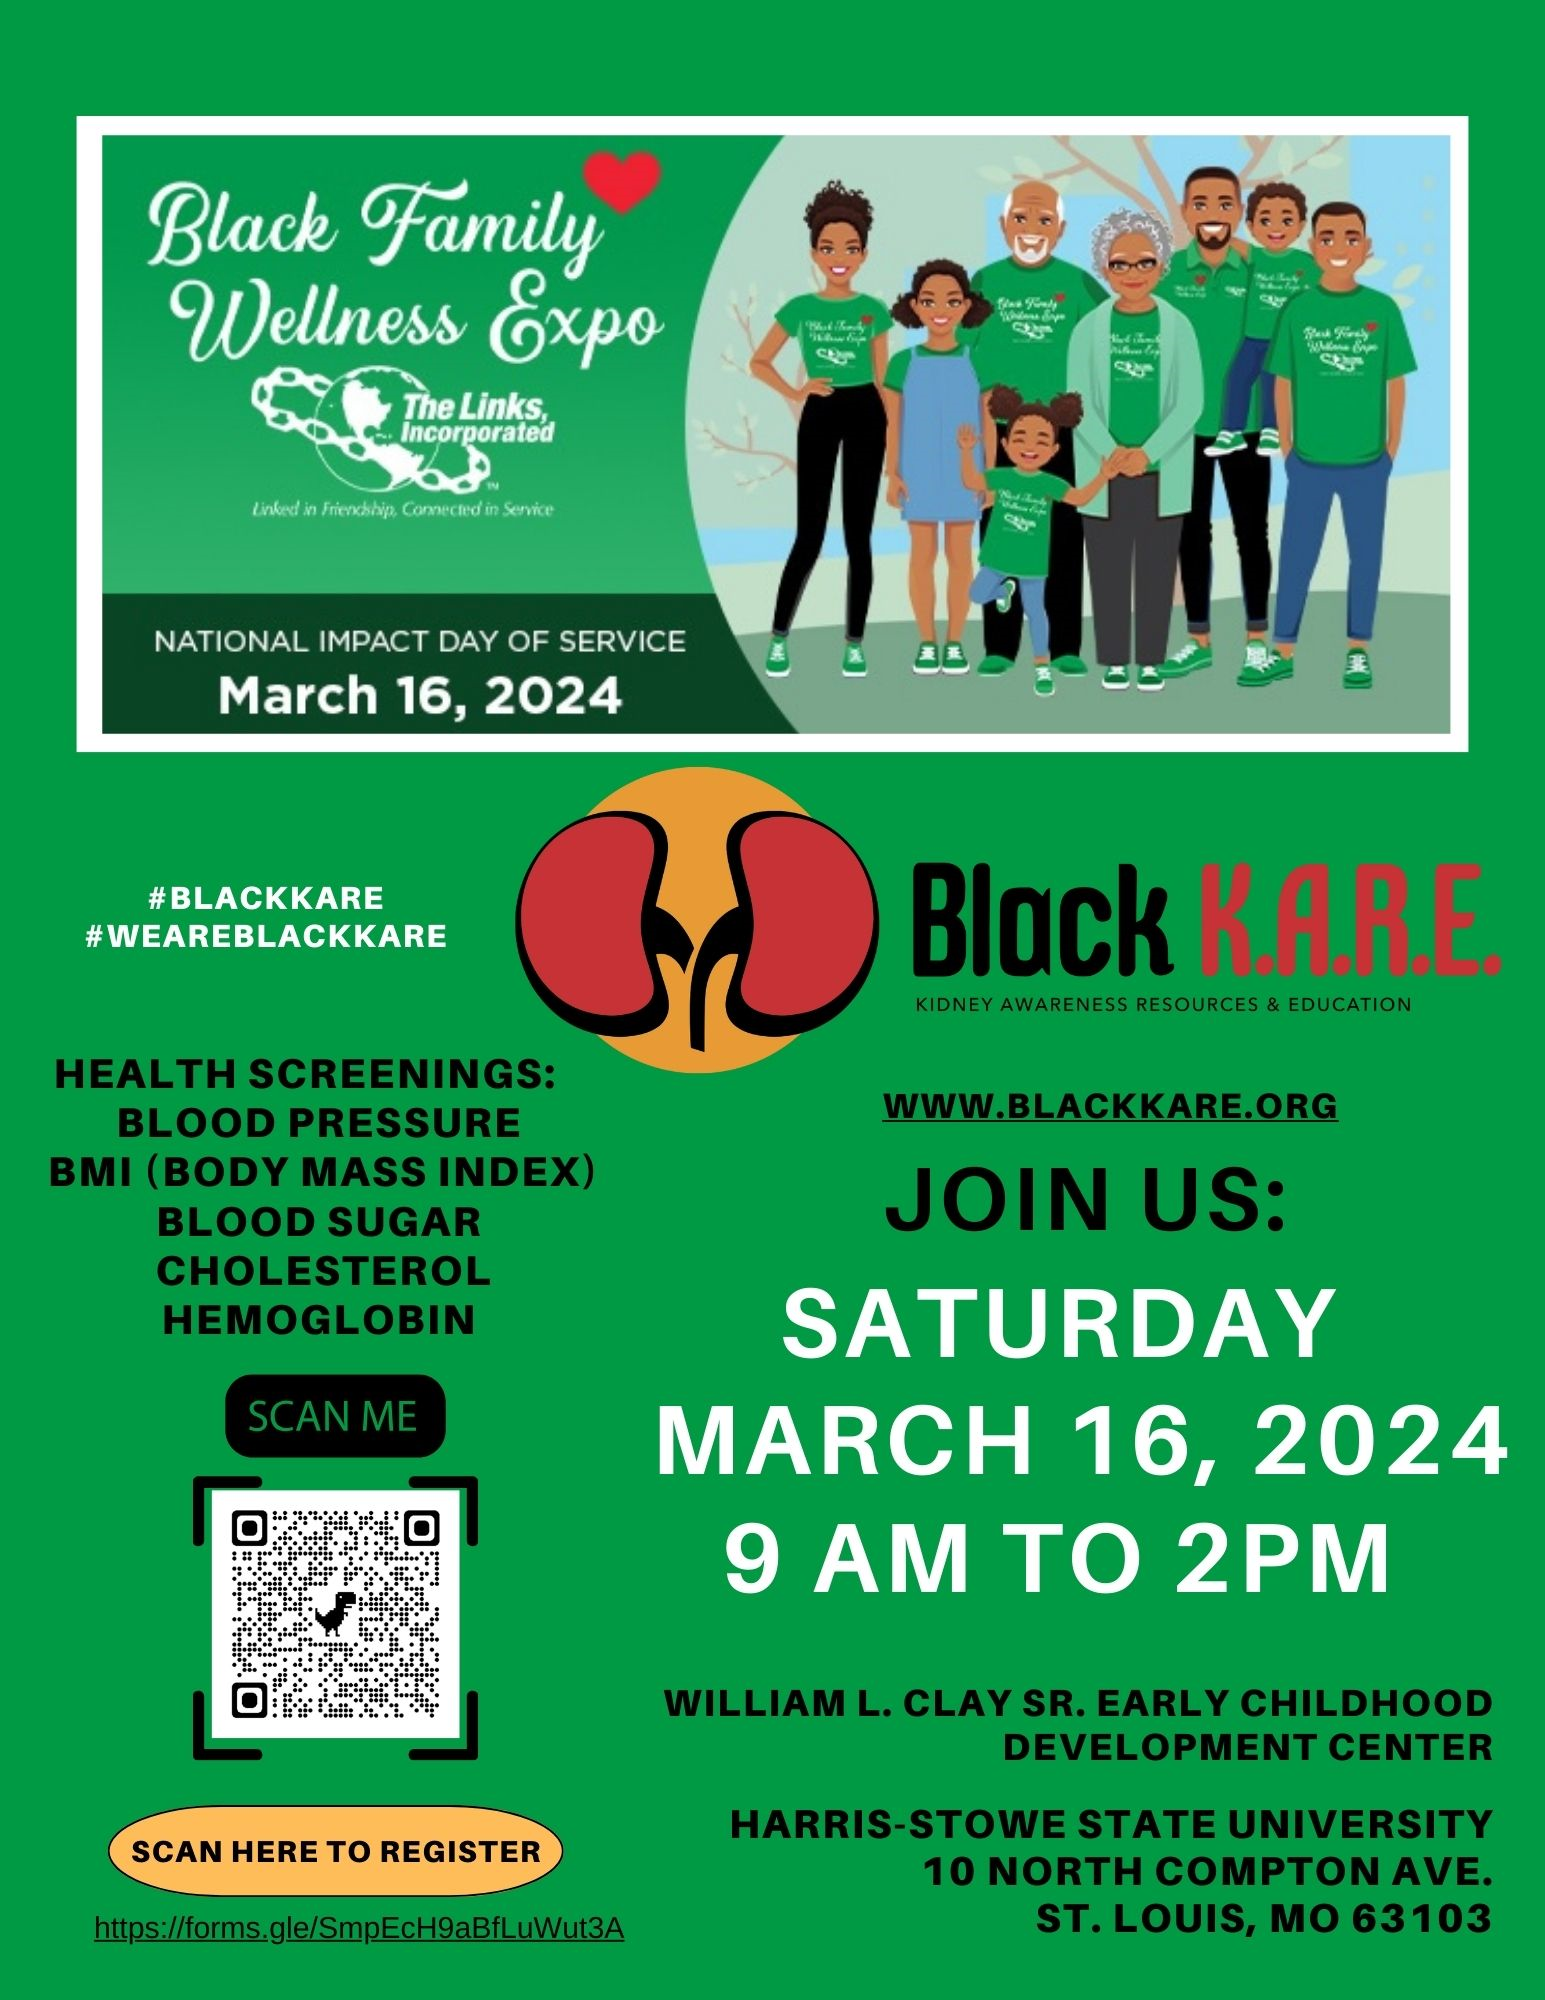 Black K.A.R.E. Family Expo National Impact Day of Service March 16, 2024